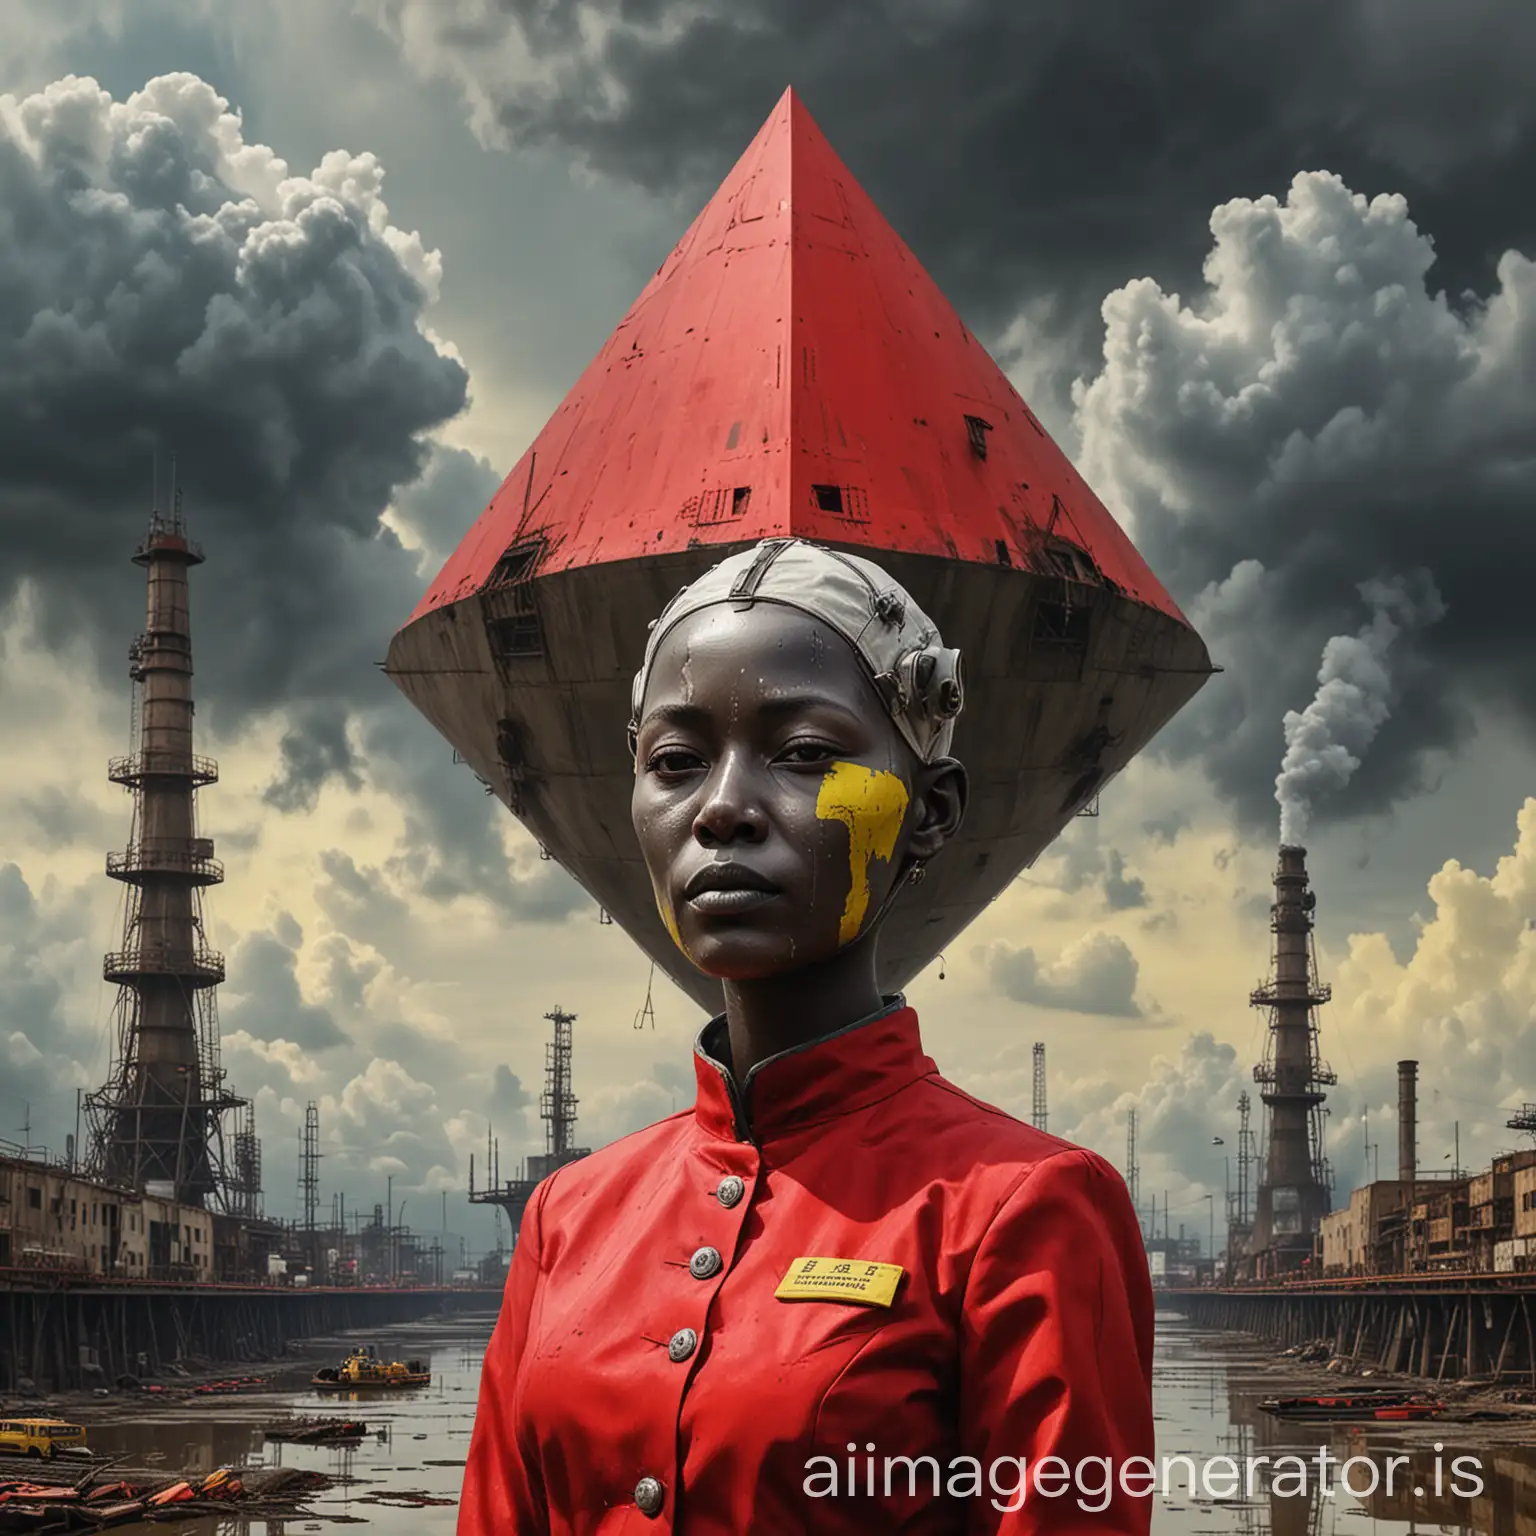 close-up enslaved people-suits-bathyscaphes,concrete buildings,distillation petrochemical columns, square in a rhombus huge head of the overseer in the sky,palette red and acid yellow, black clouds